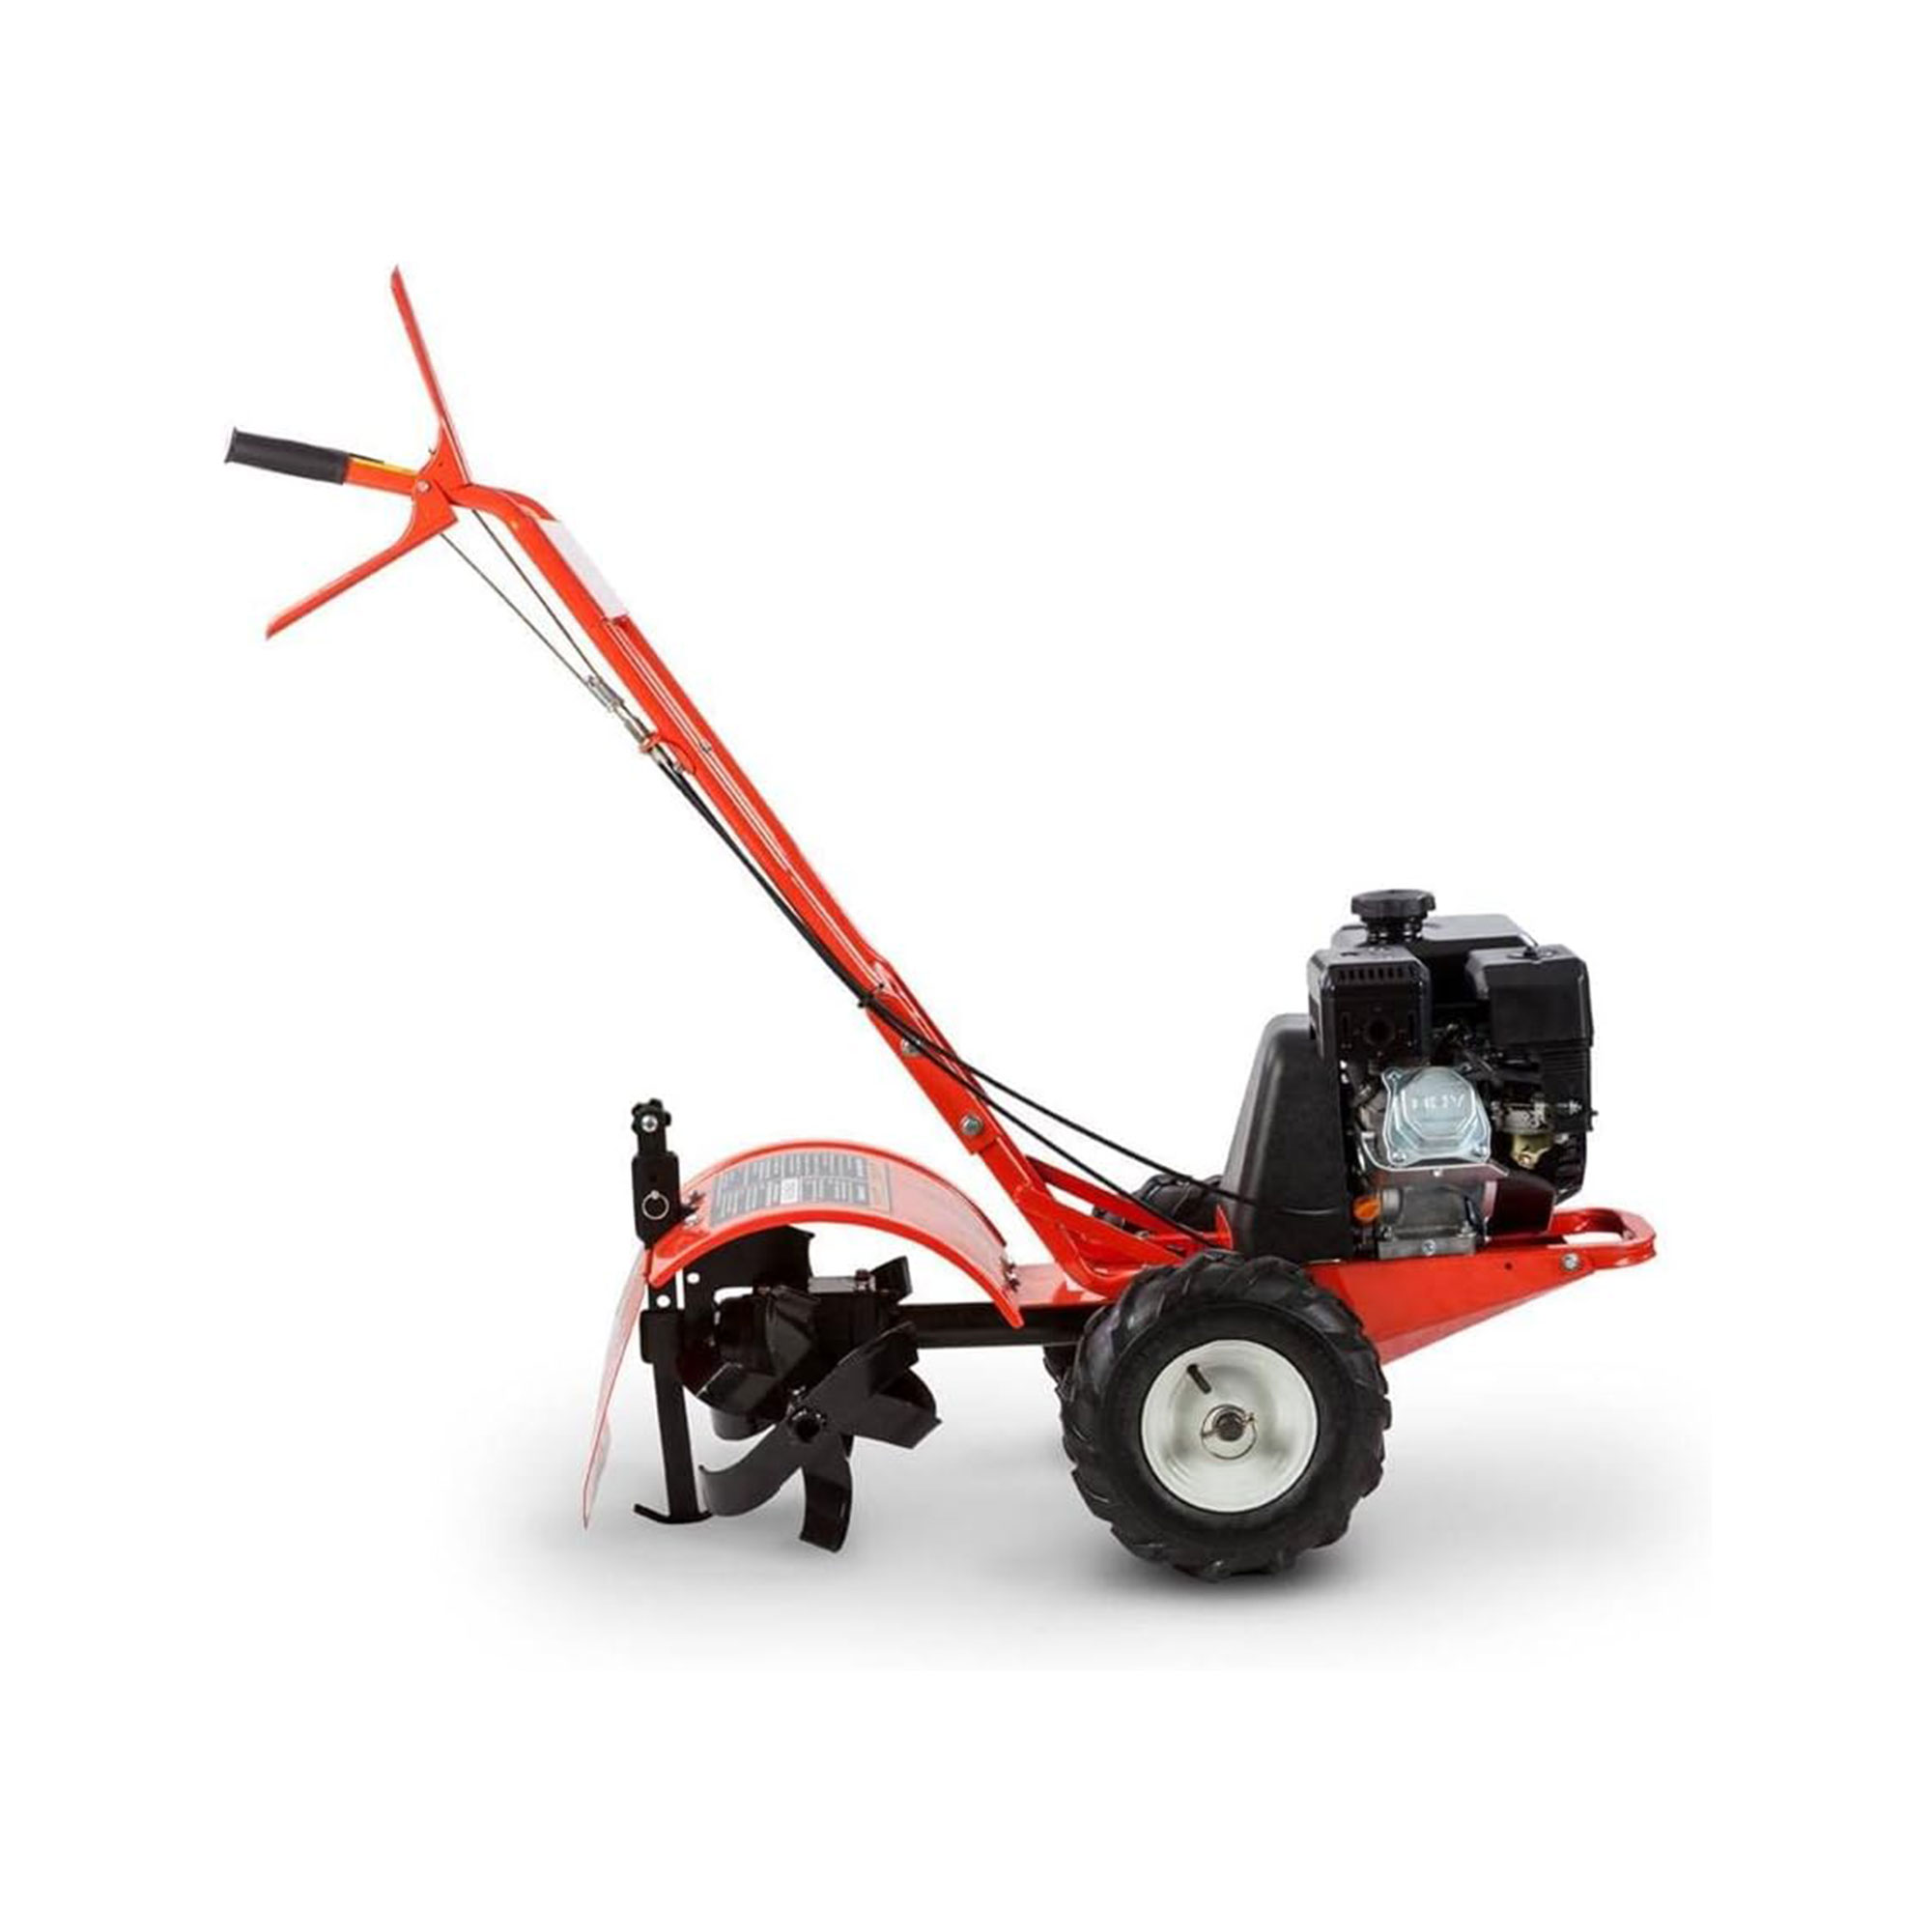 DR 11 Inch Rear Tine Walk Behind Tiller with Counter Rotating Tines, Orange - image 5 of 7